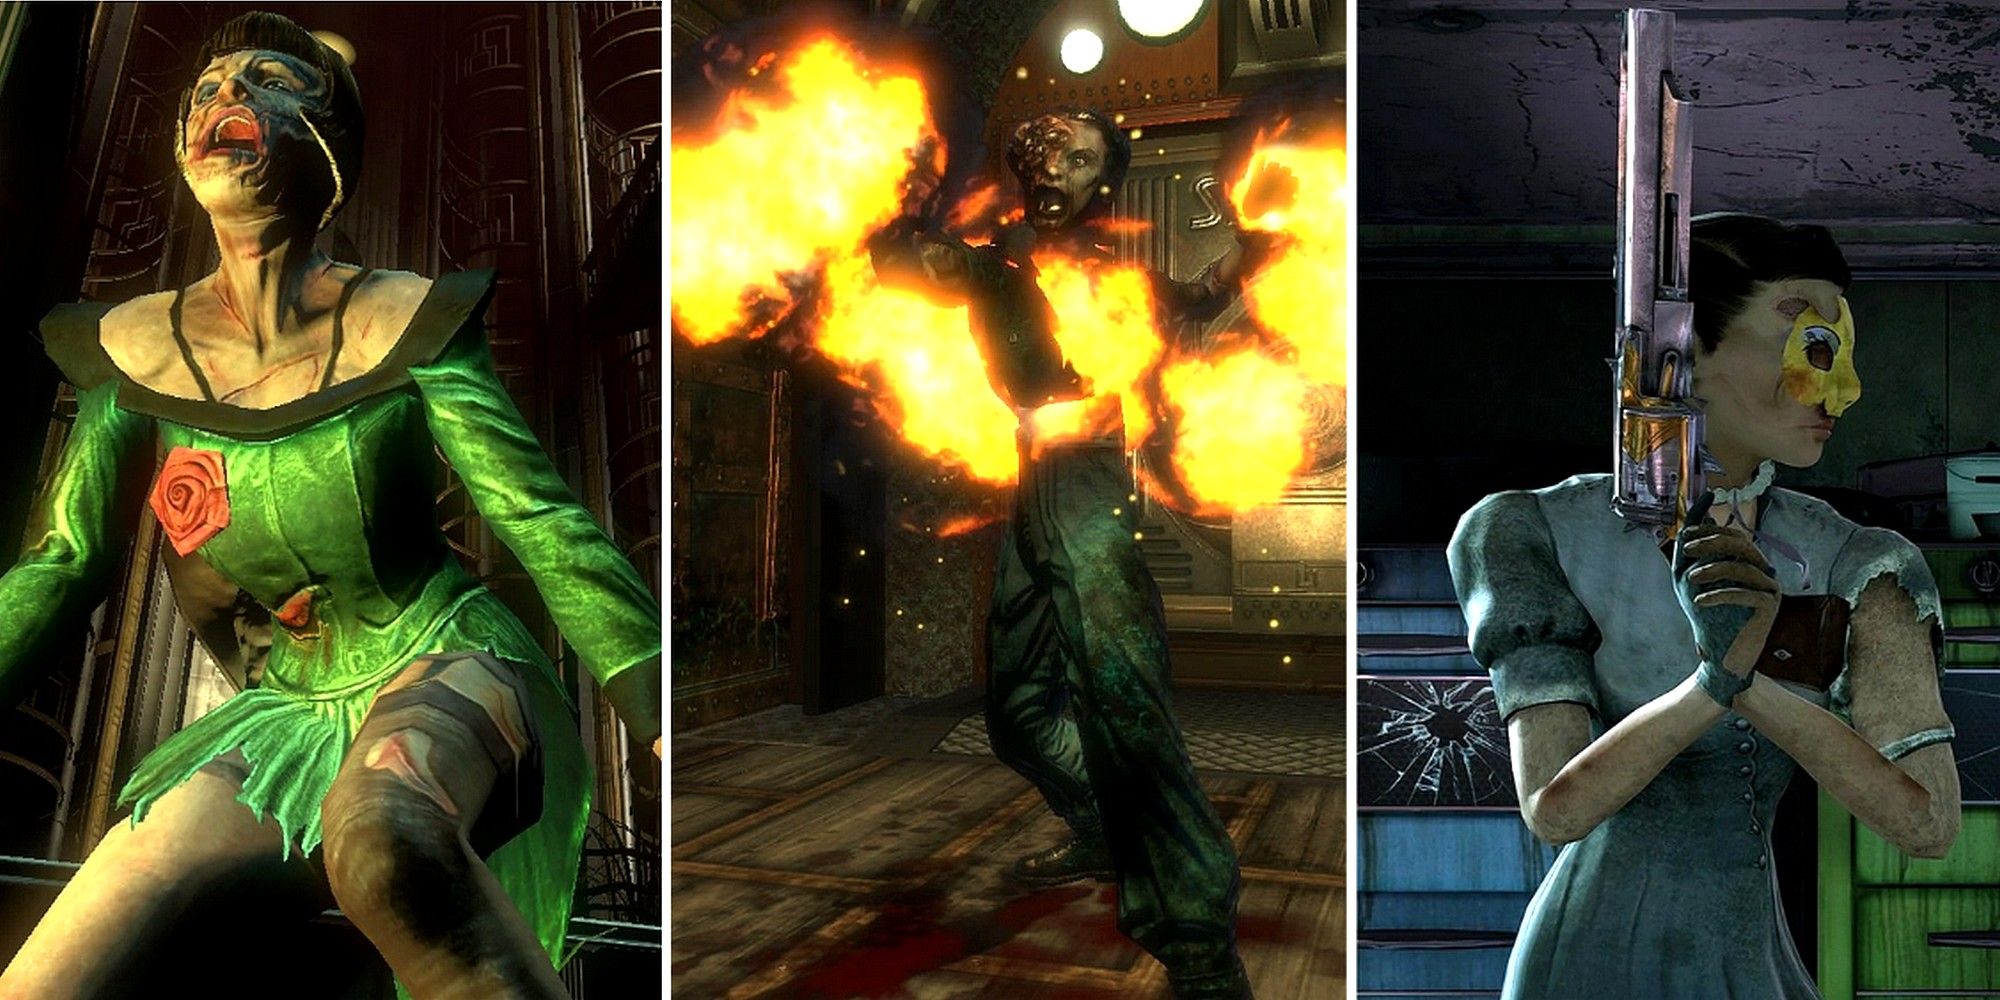 Three different types of Splicers from BioShock: spider, Houdini, and early